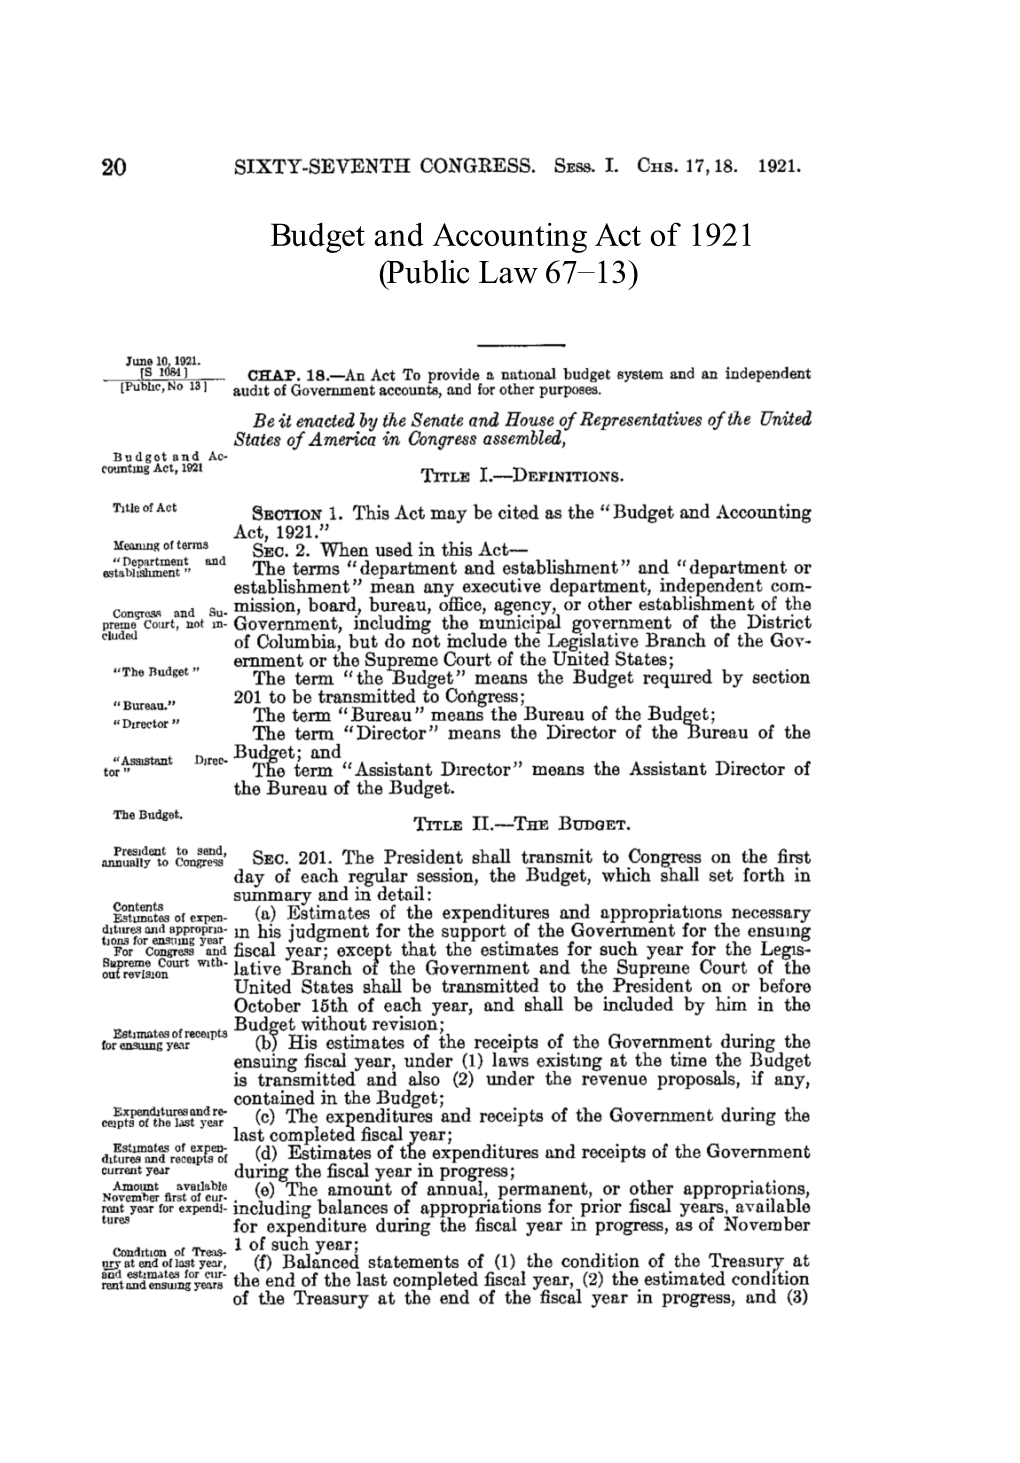 Budget and Accounting Act of 1921